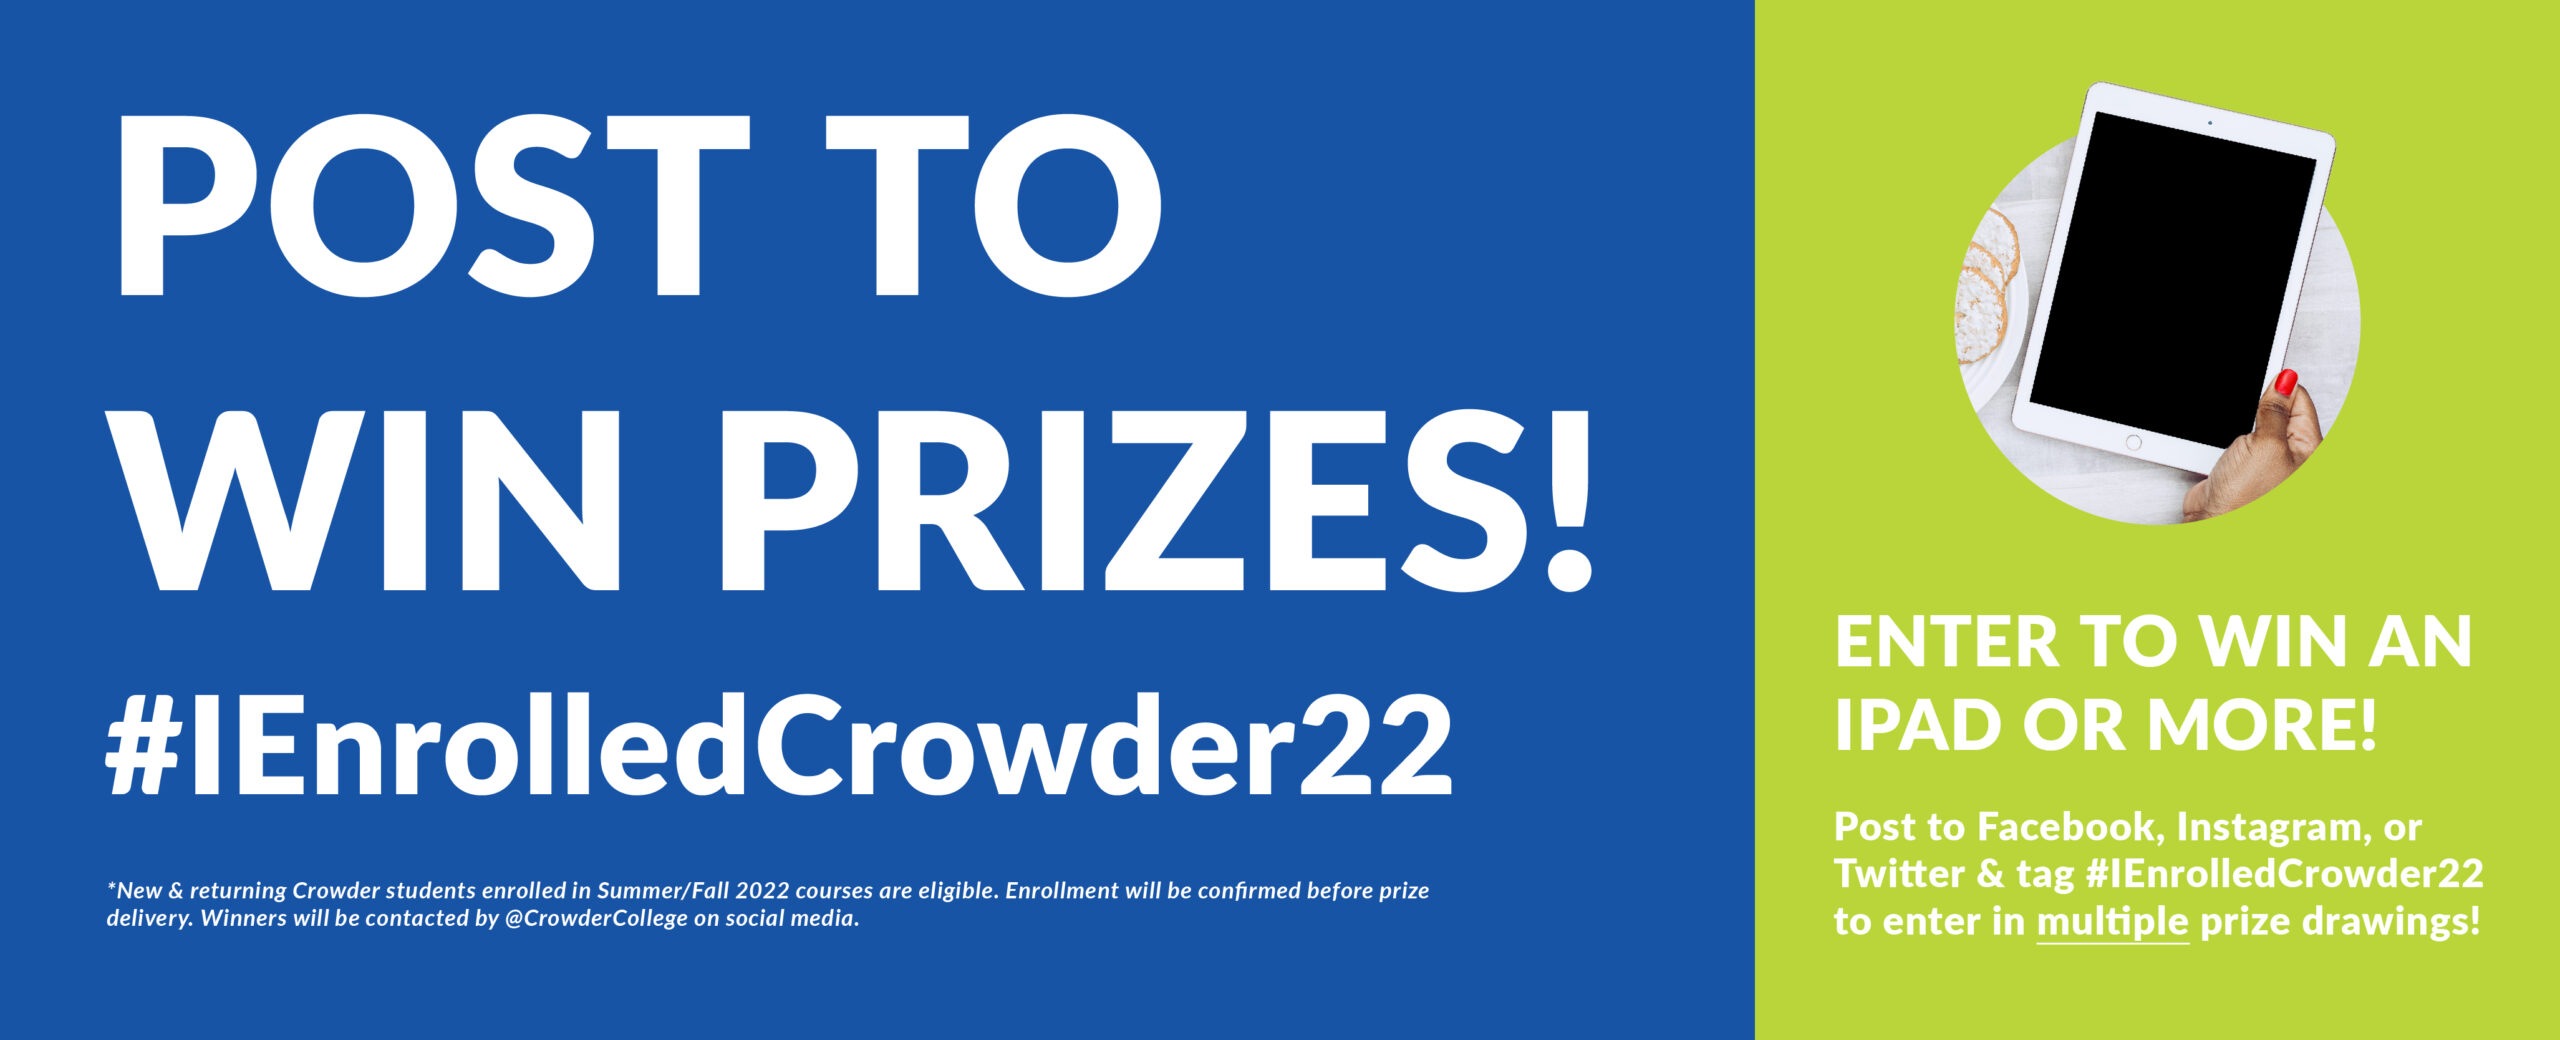 Post to win prizes! Enter to win an ipad and more by posting #IEnrolledCrwoder22 to Facebook, Twitter, or Facebook.